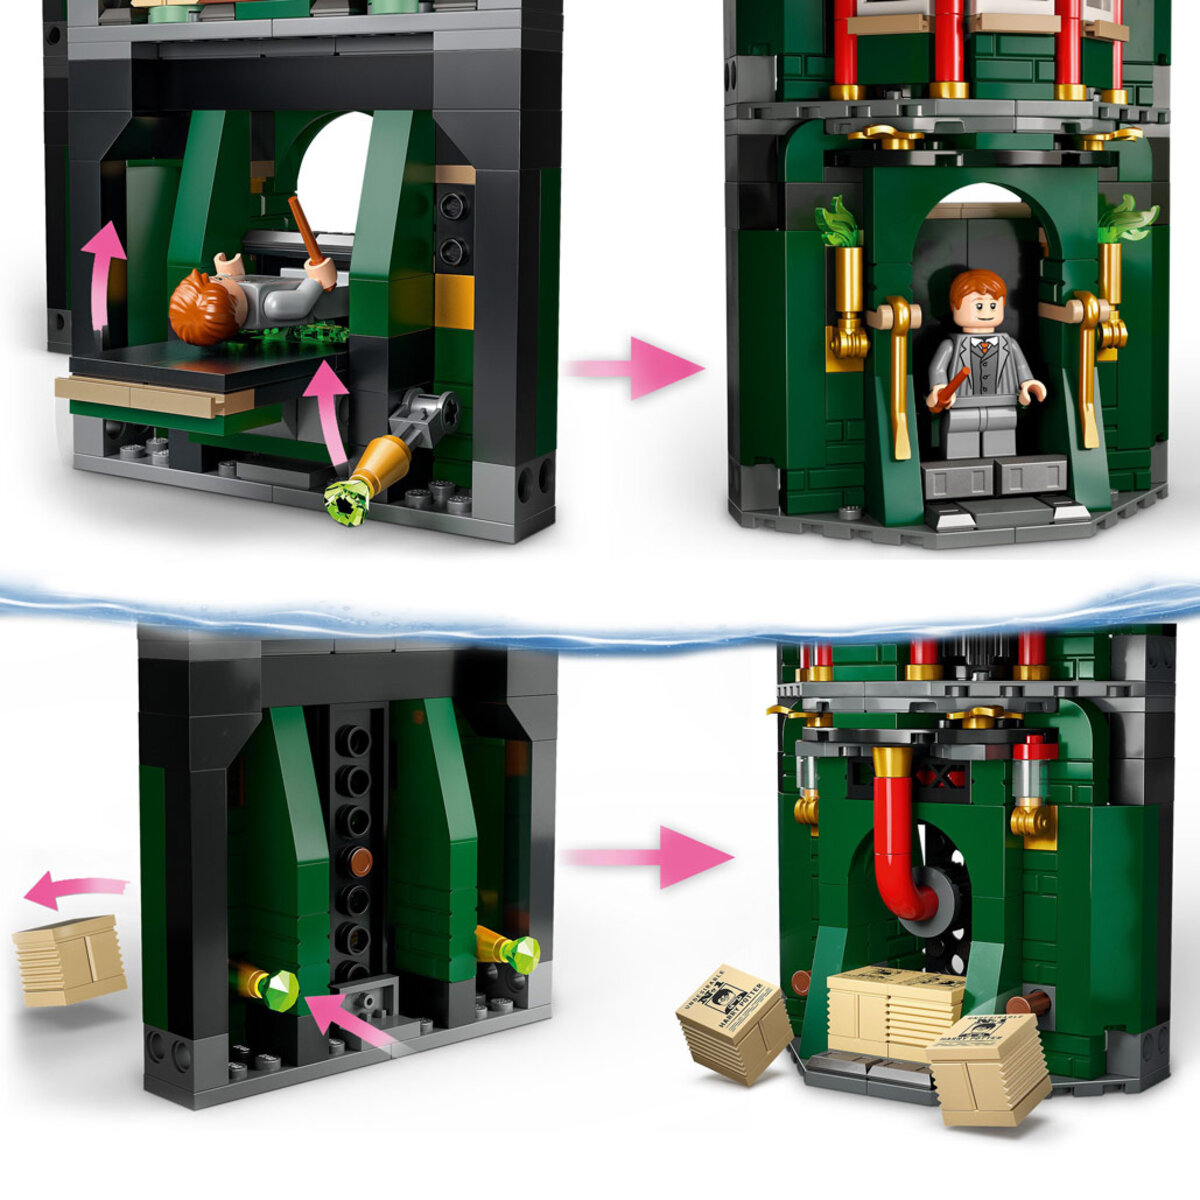 Buy Lego Avatar Floating Mountains: Site 26 & RDA Samson Feature2 Image at Costco.co.uk